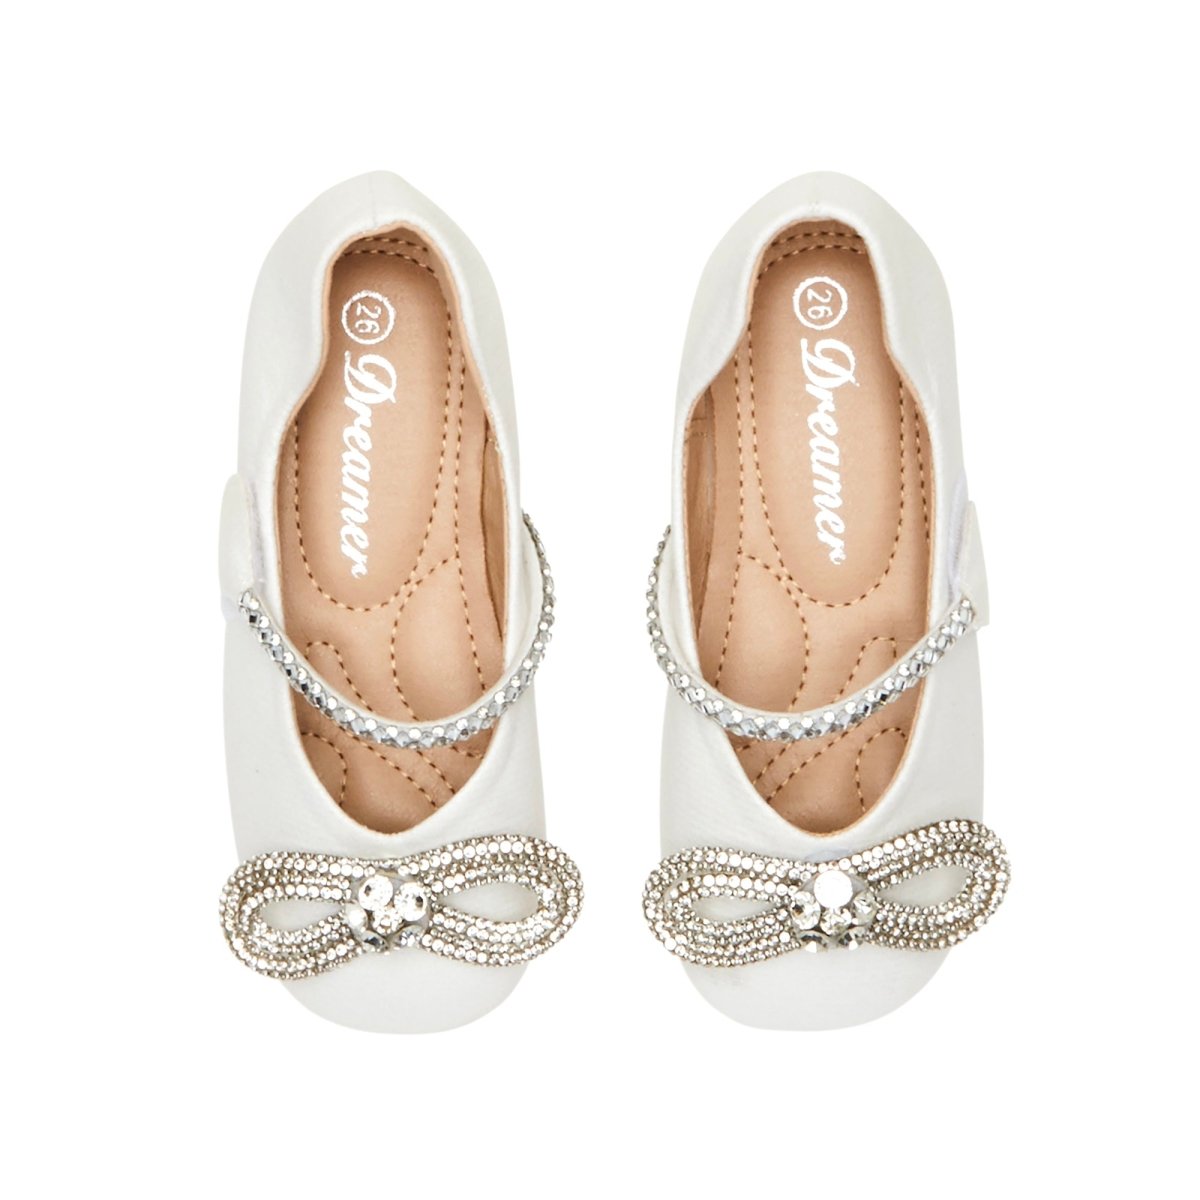 MACH CRYSTAL BOW SHOES - MINI DREAMERS